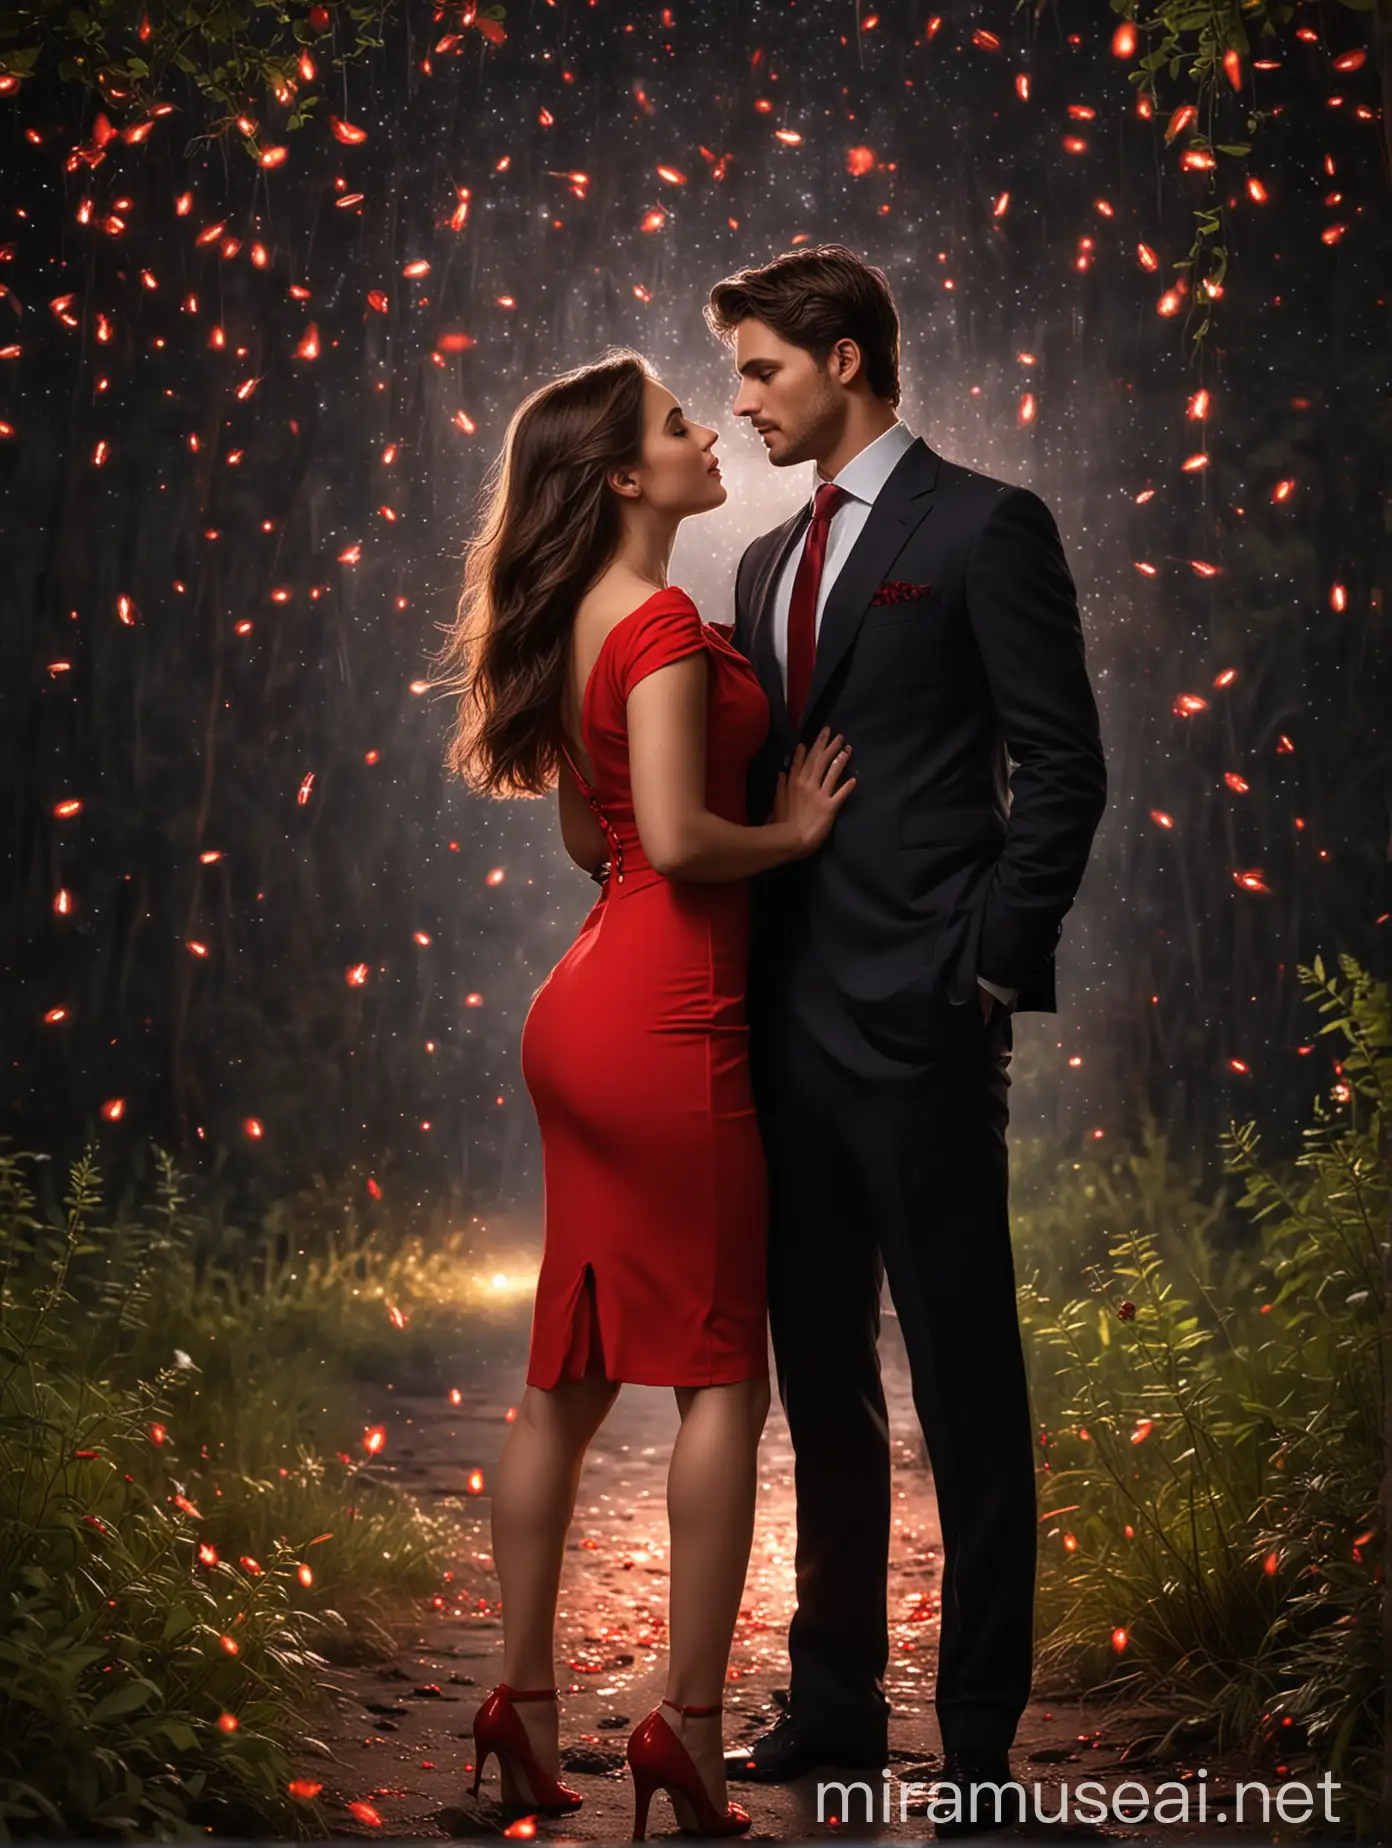 A beautiful hot woman in a fitted red dress, held romantically by a handsome young hot good looking man in suit, with a luminous red fireflies hovering around them at the night